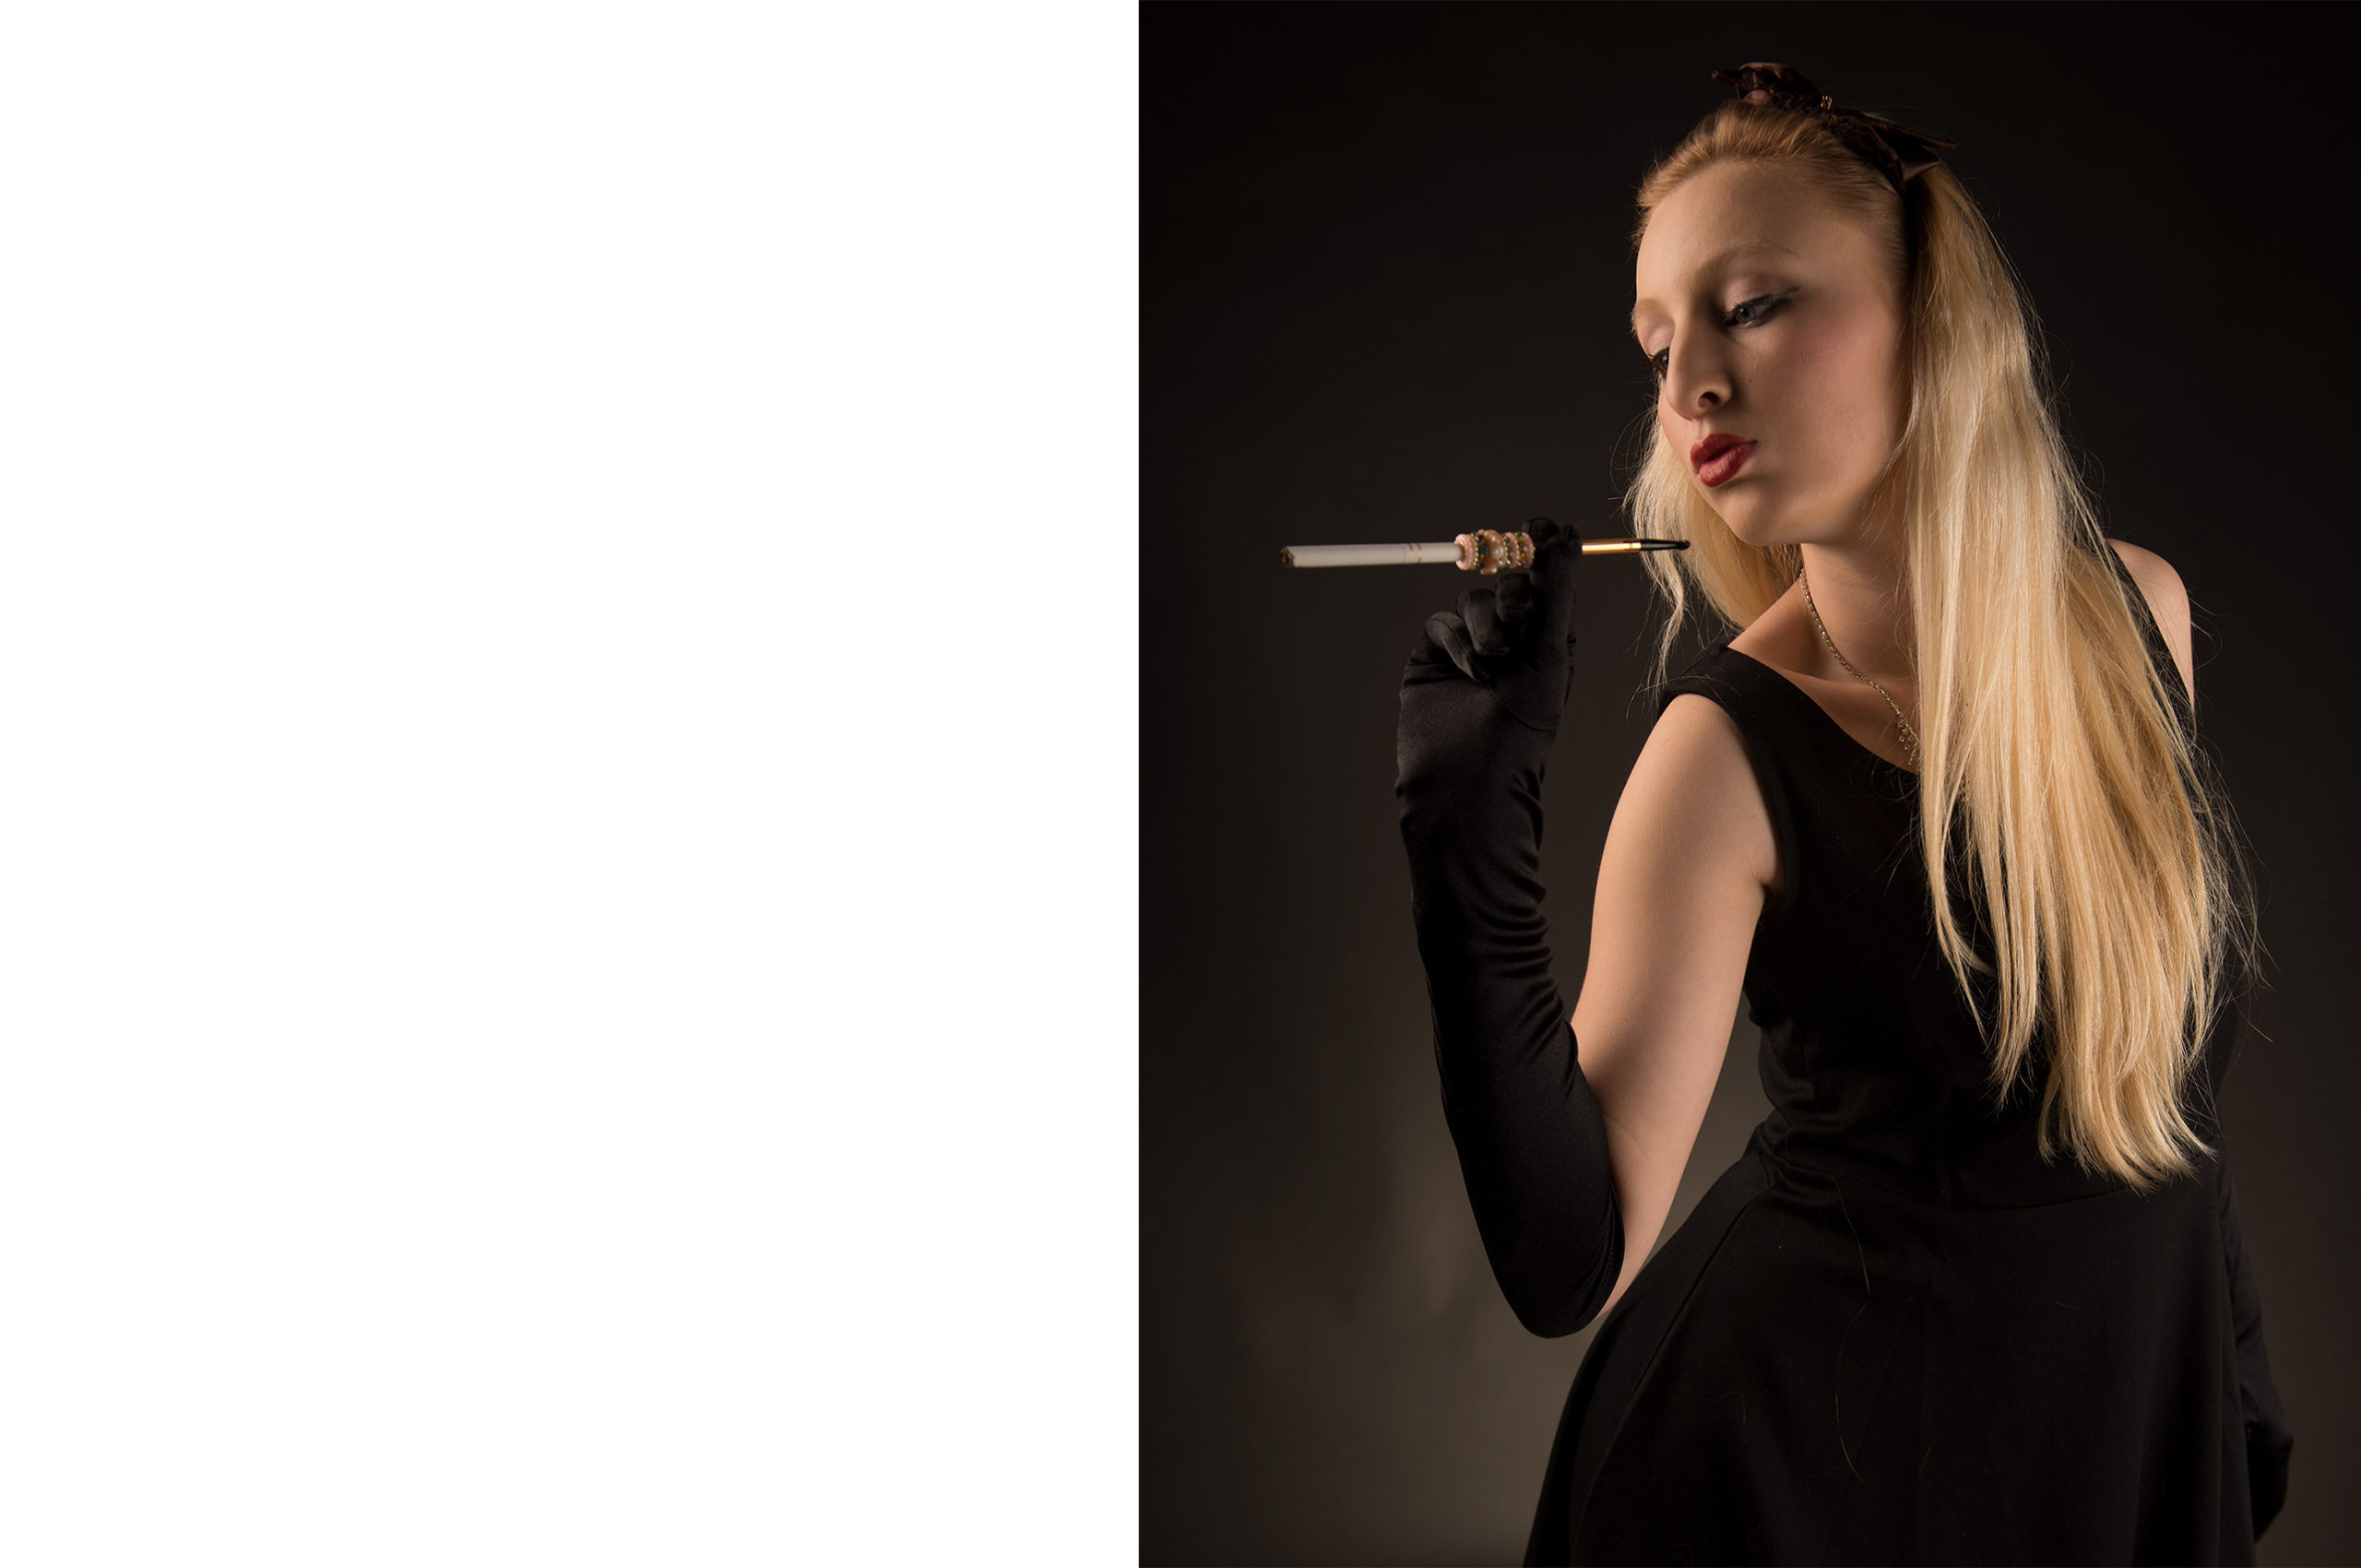 (Before Editing) Photograph of model with long cigarette and black dress